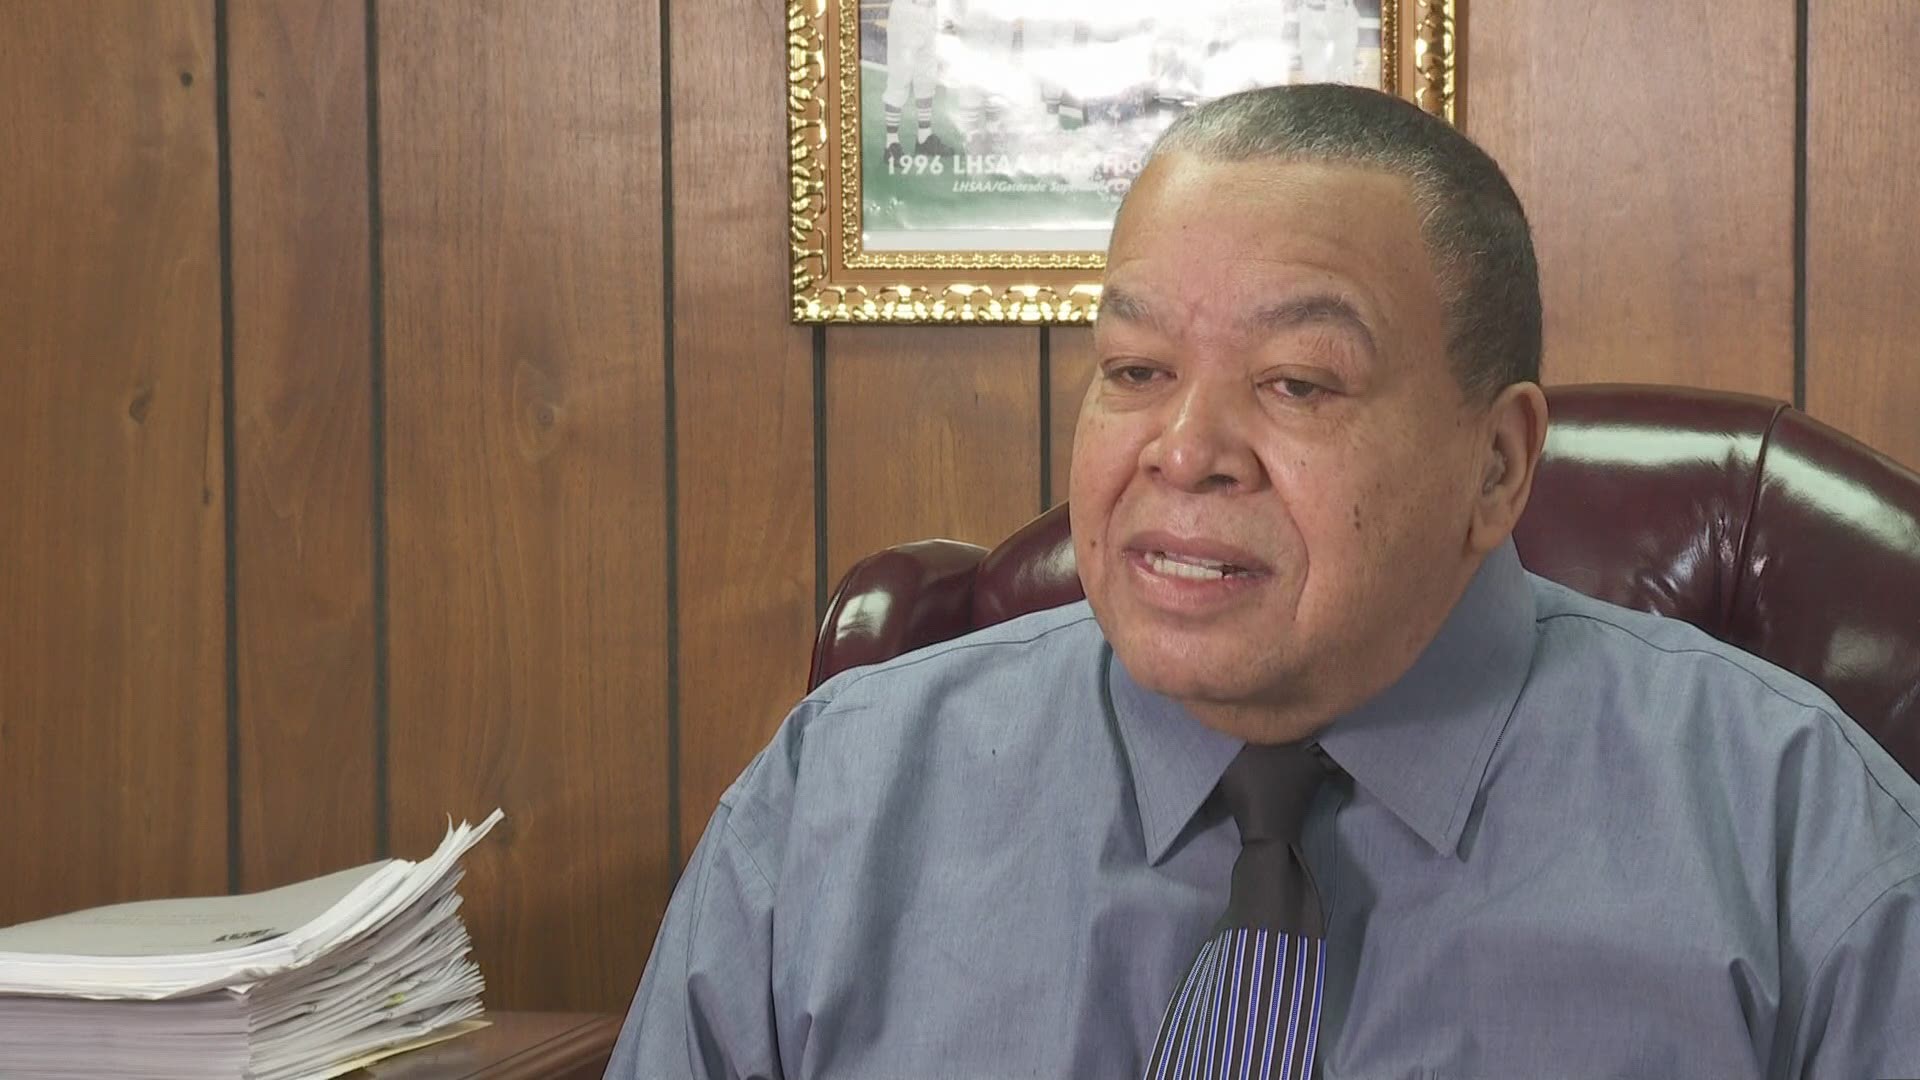 Franklinton's first black mayor faces pushback over appointments, including for police chief